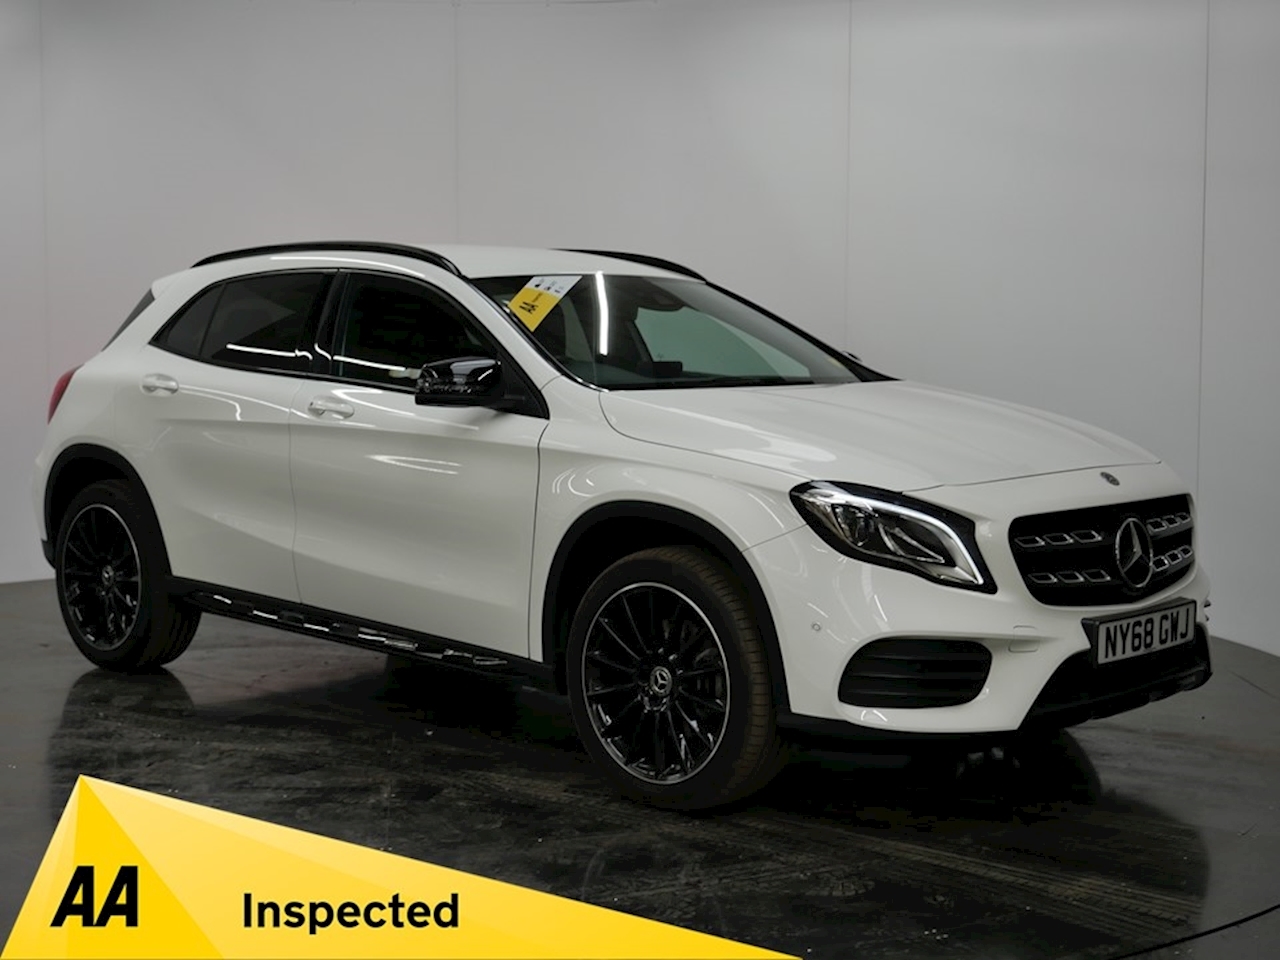 2.1 GLA220d AMG Line (Premium) SUV 5dr Diesel 7G-DCT 4MATIC (s/s) (170 ps)